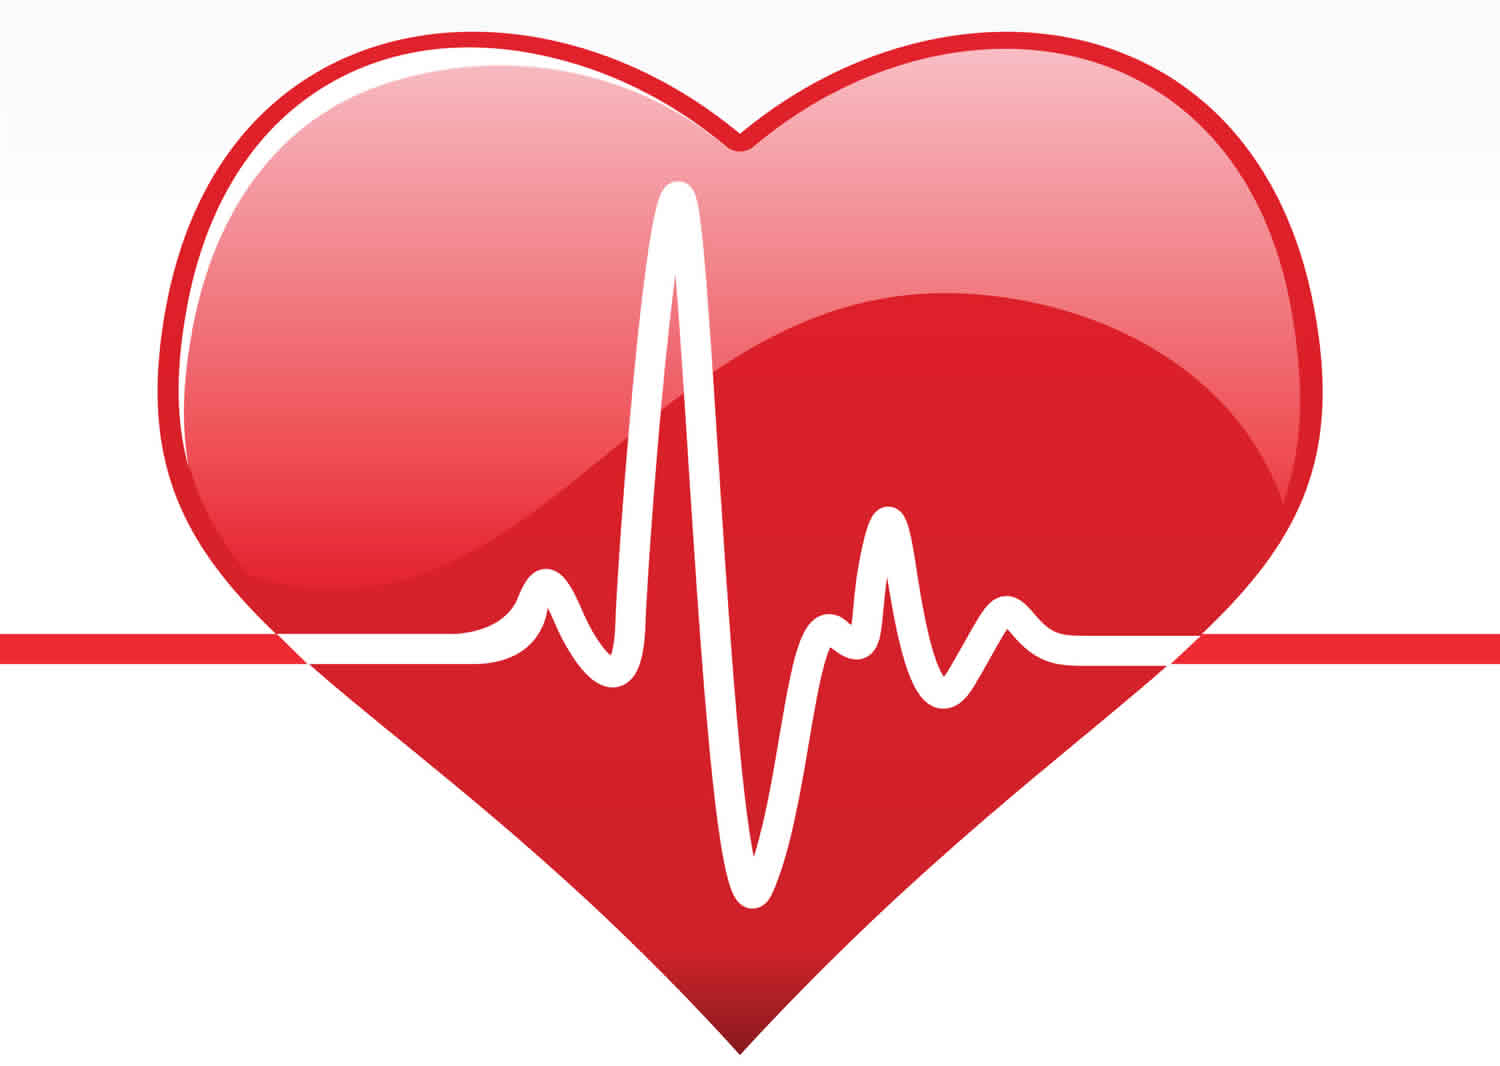 Heart block causes, symptoms, types, diagnosis and heart block treatment